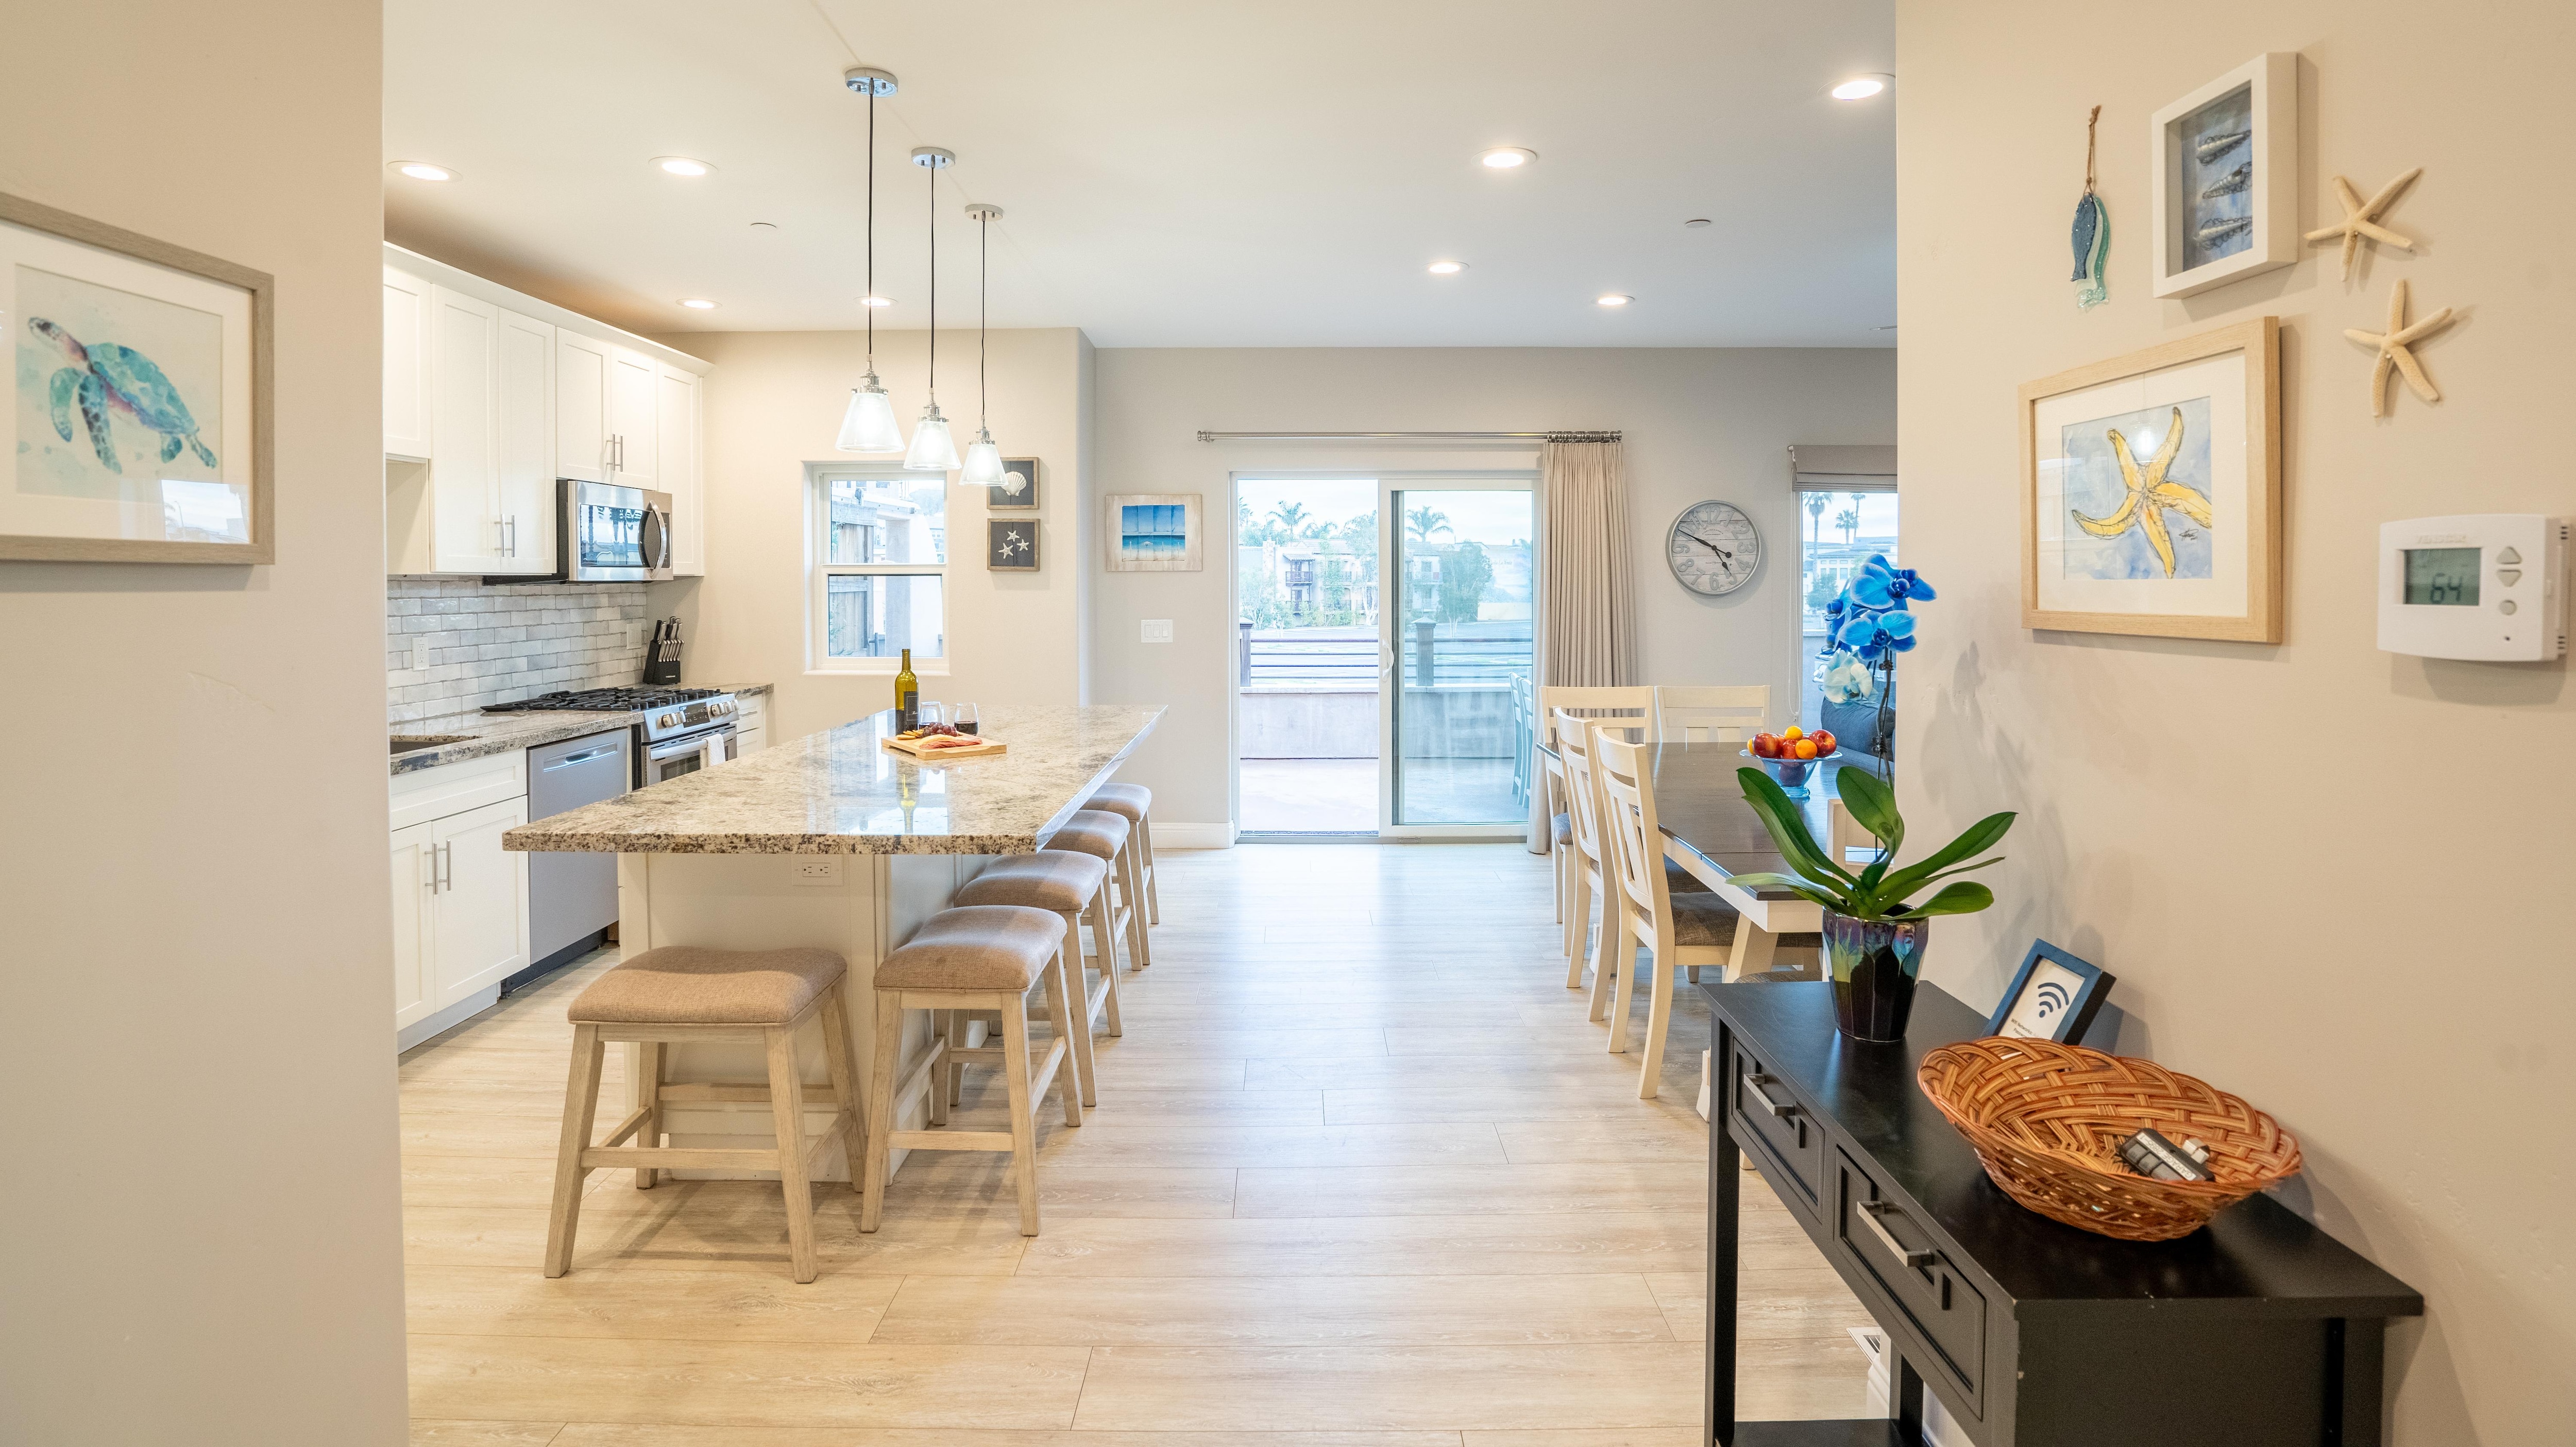 Step into Casa Alina, a four-bedroom seaside home  perfectly located in the heart of Avila Beach. This inviting home boasts four en-suite bedrooms and 3-1/2 bathrooms, ensuring comfort and convenience for all guests.